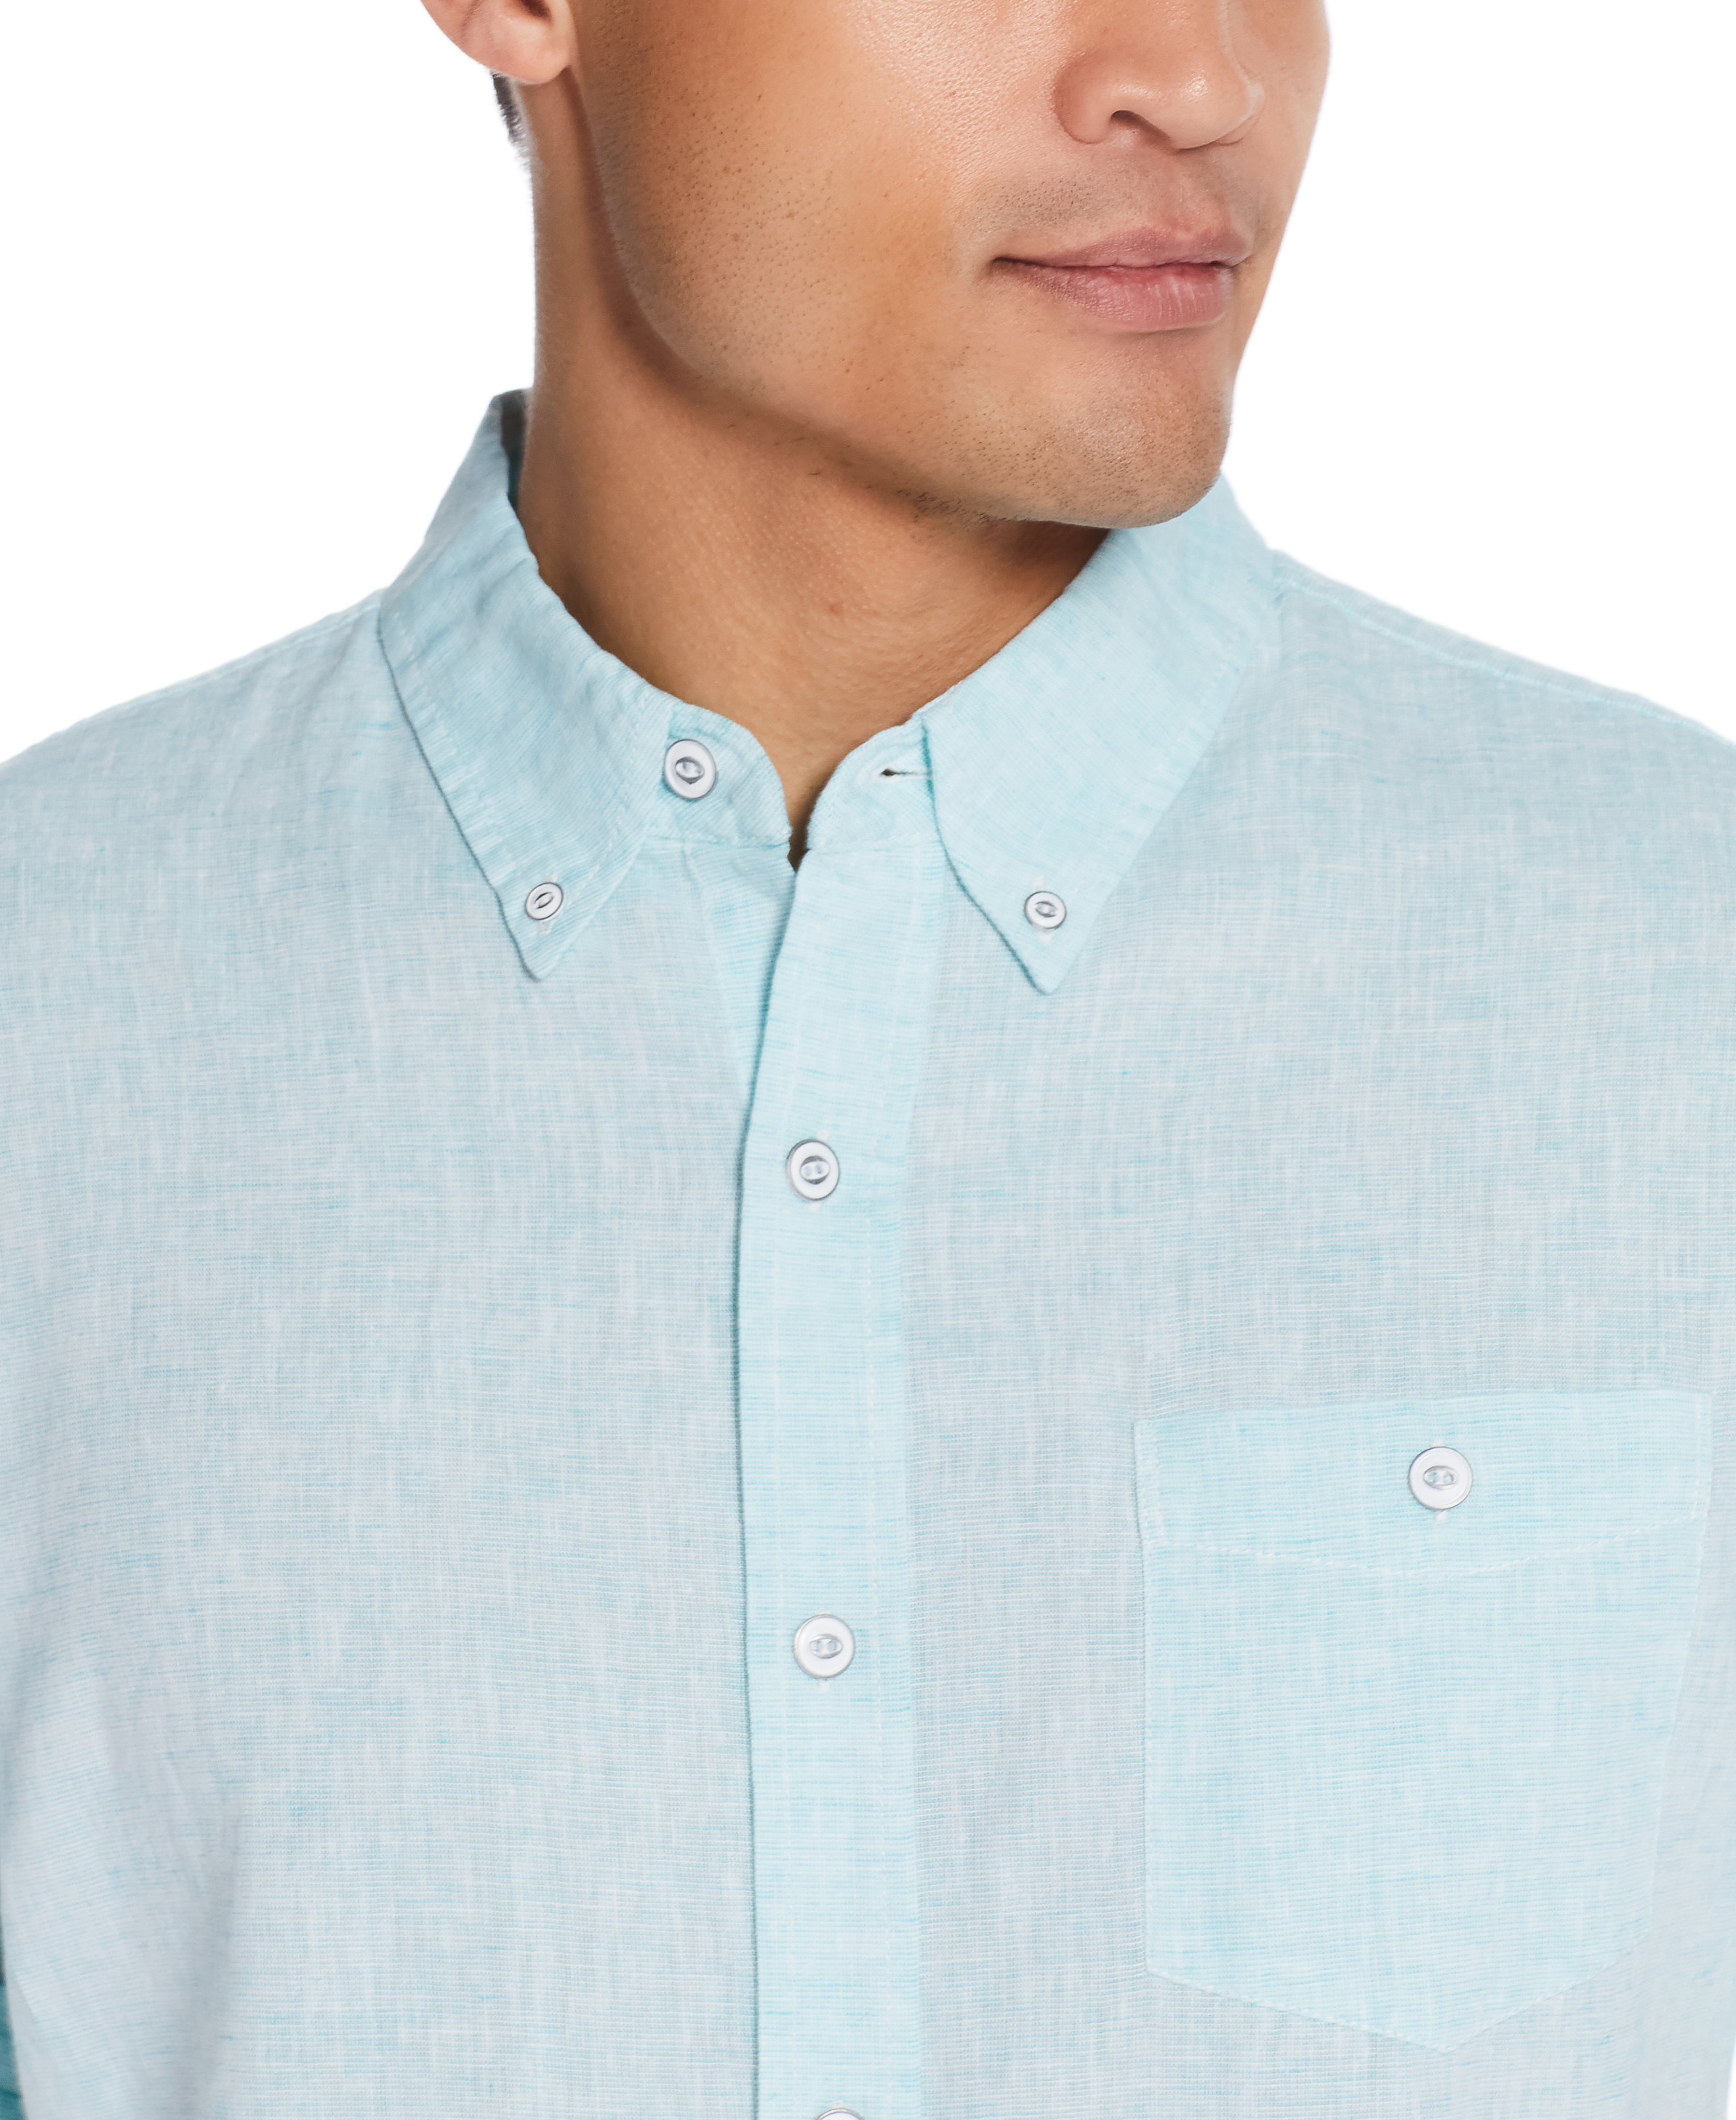 SHORT SLEEVE SOLID LINEN COTTON in MINT